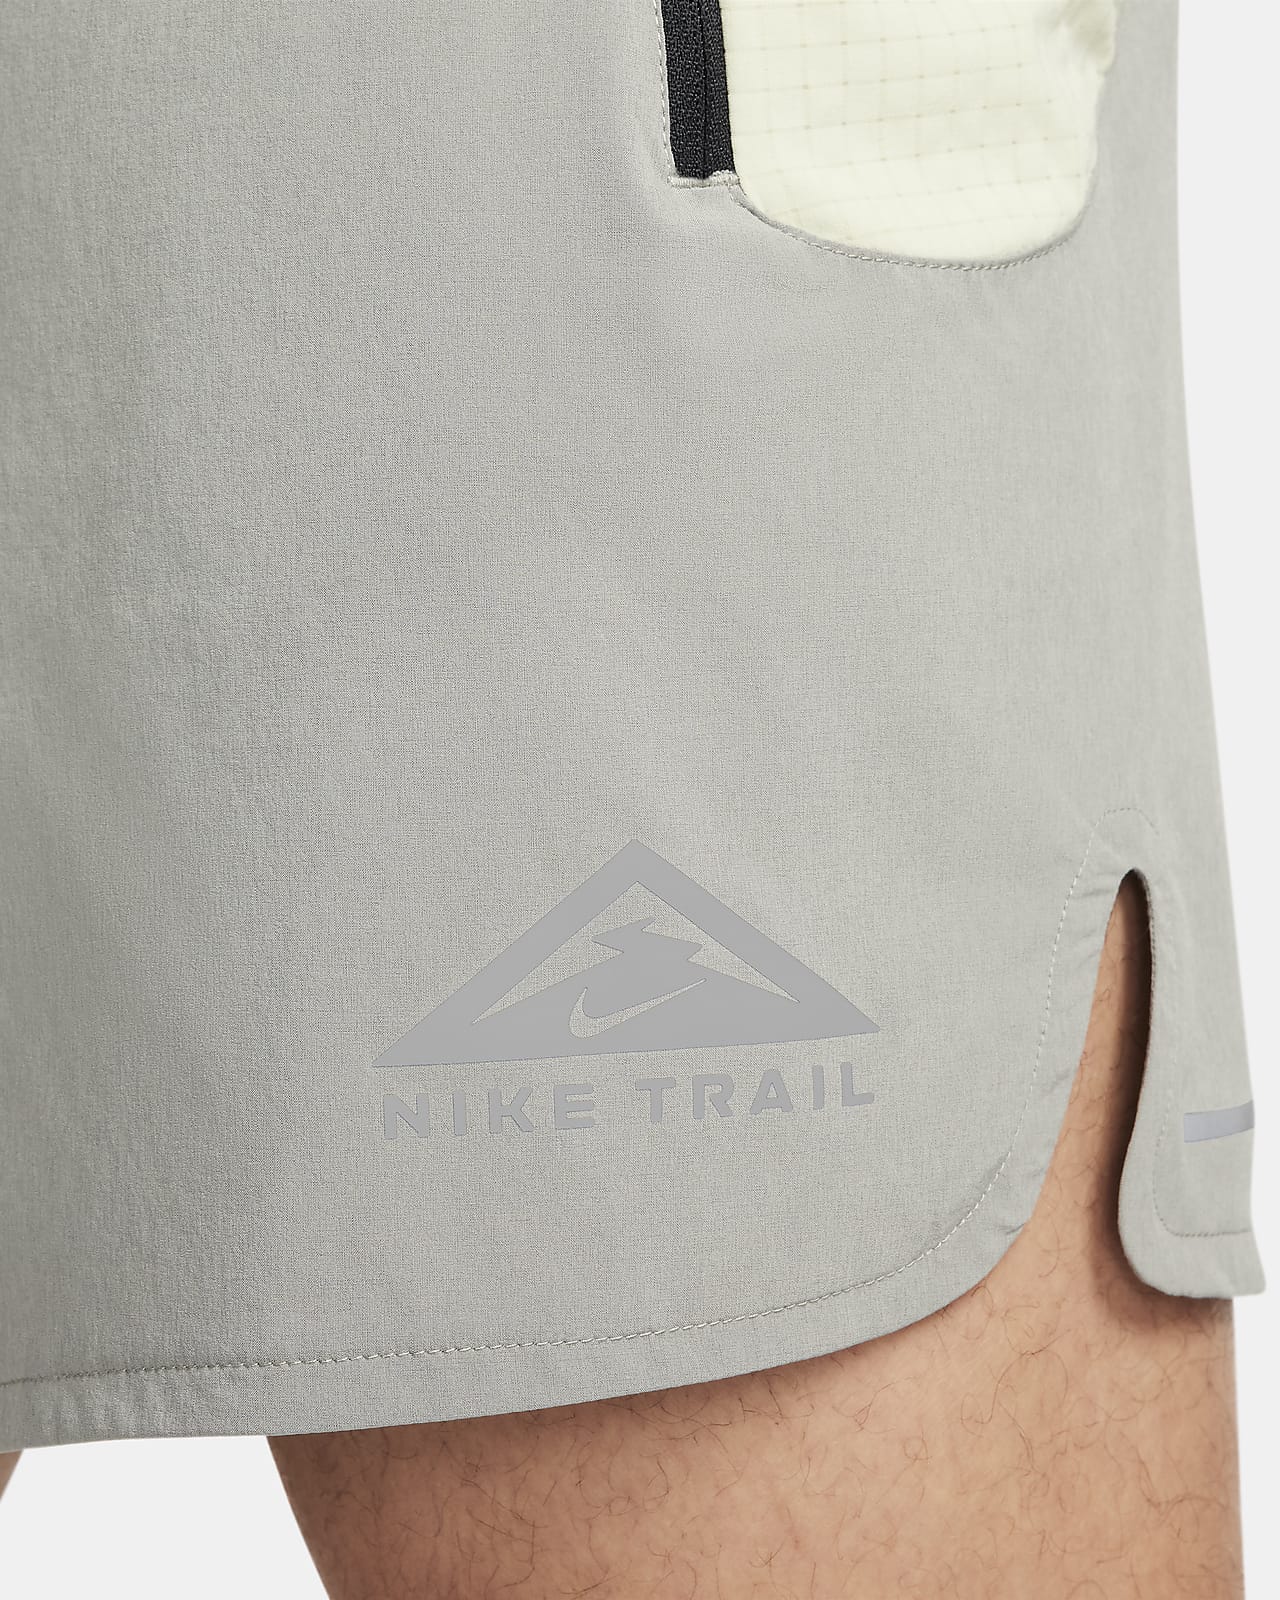 Nike Trail Second Sunrise Men's Dri-FIT 7 Brief-Lined Running Shorts.